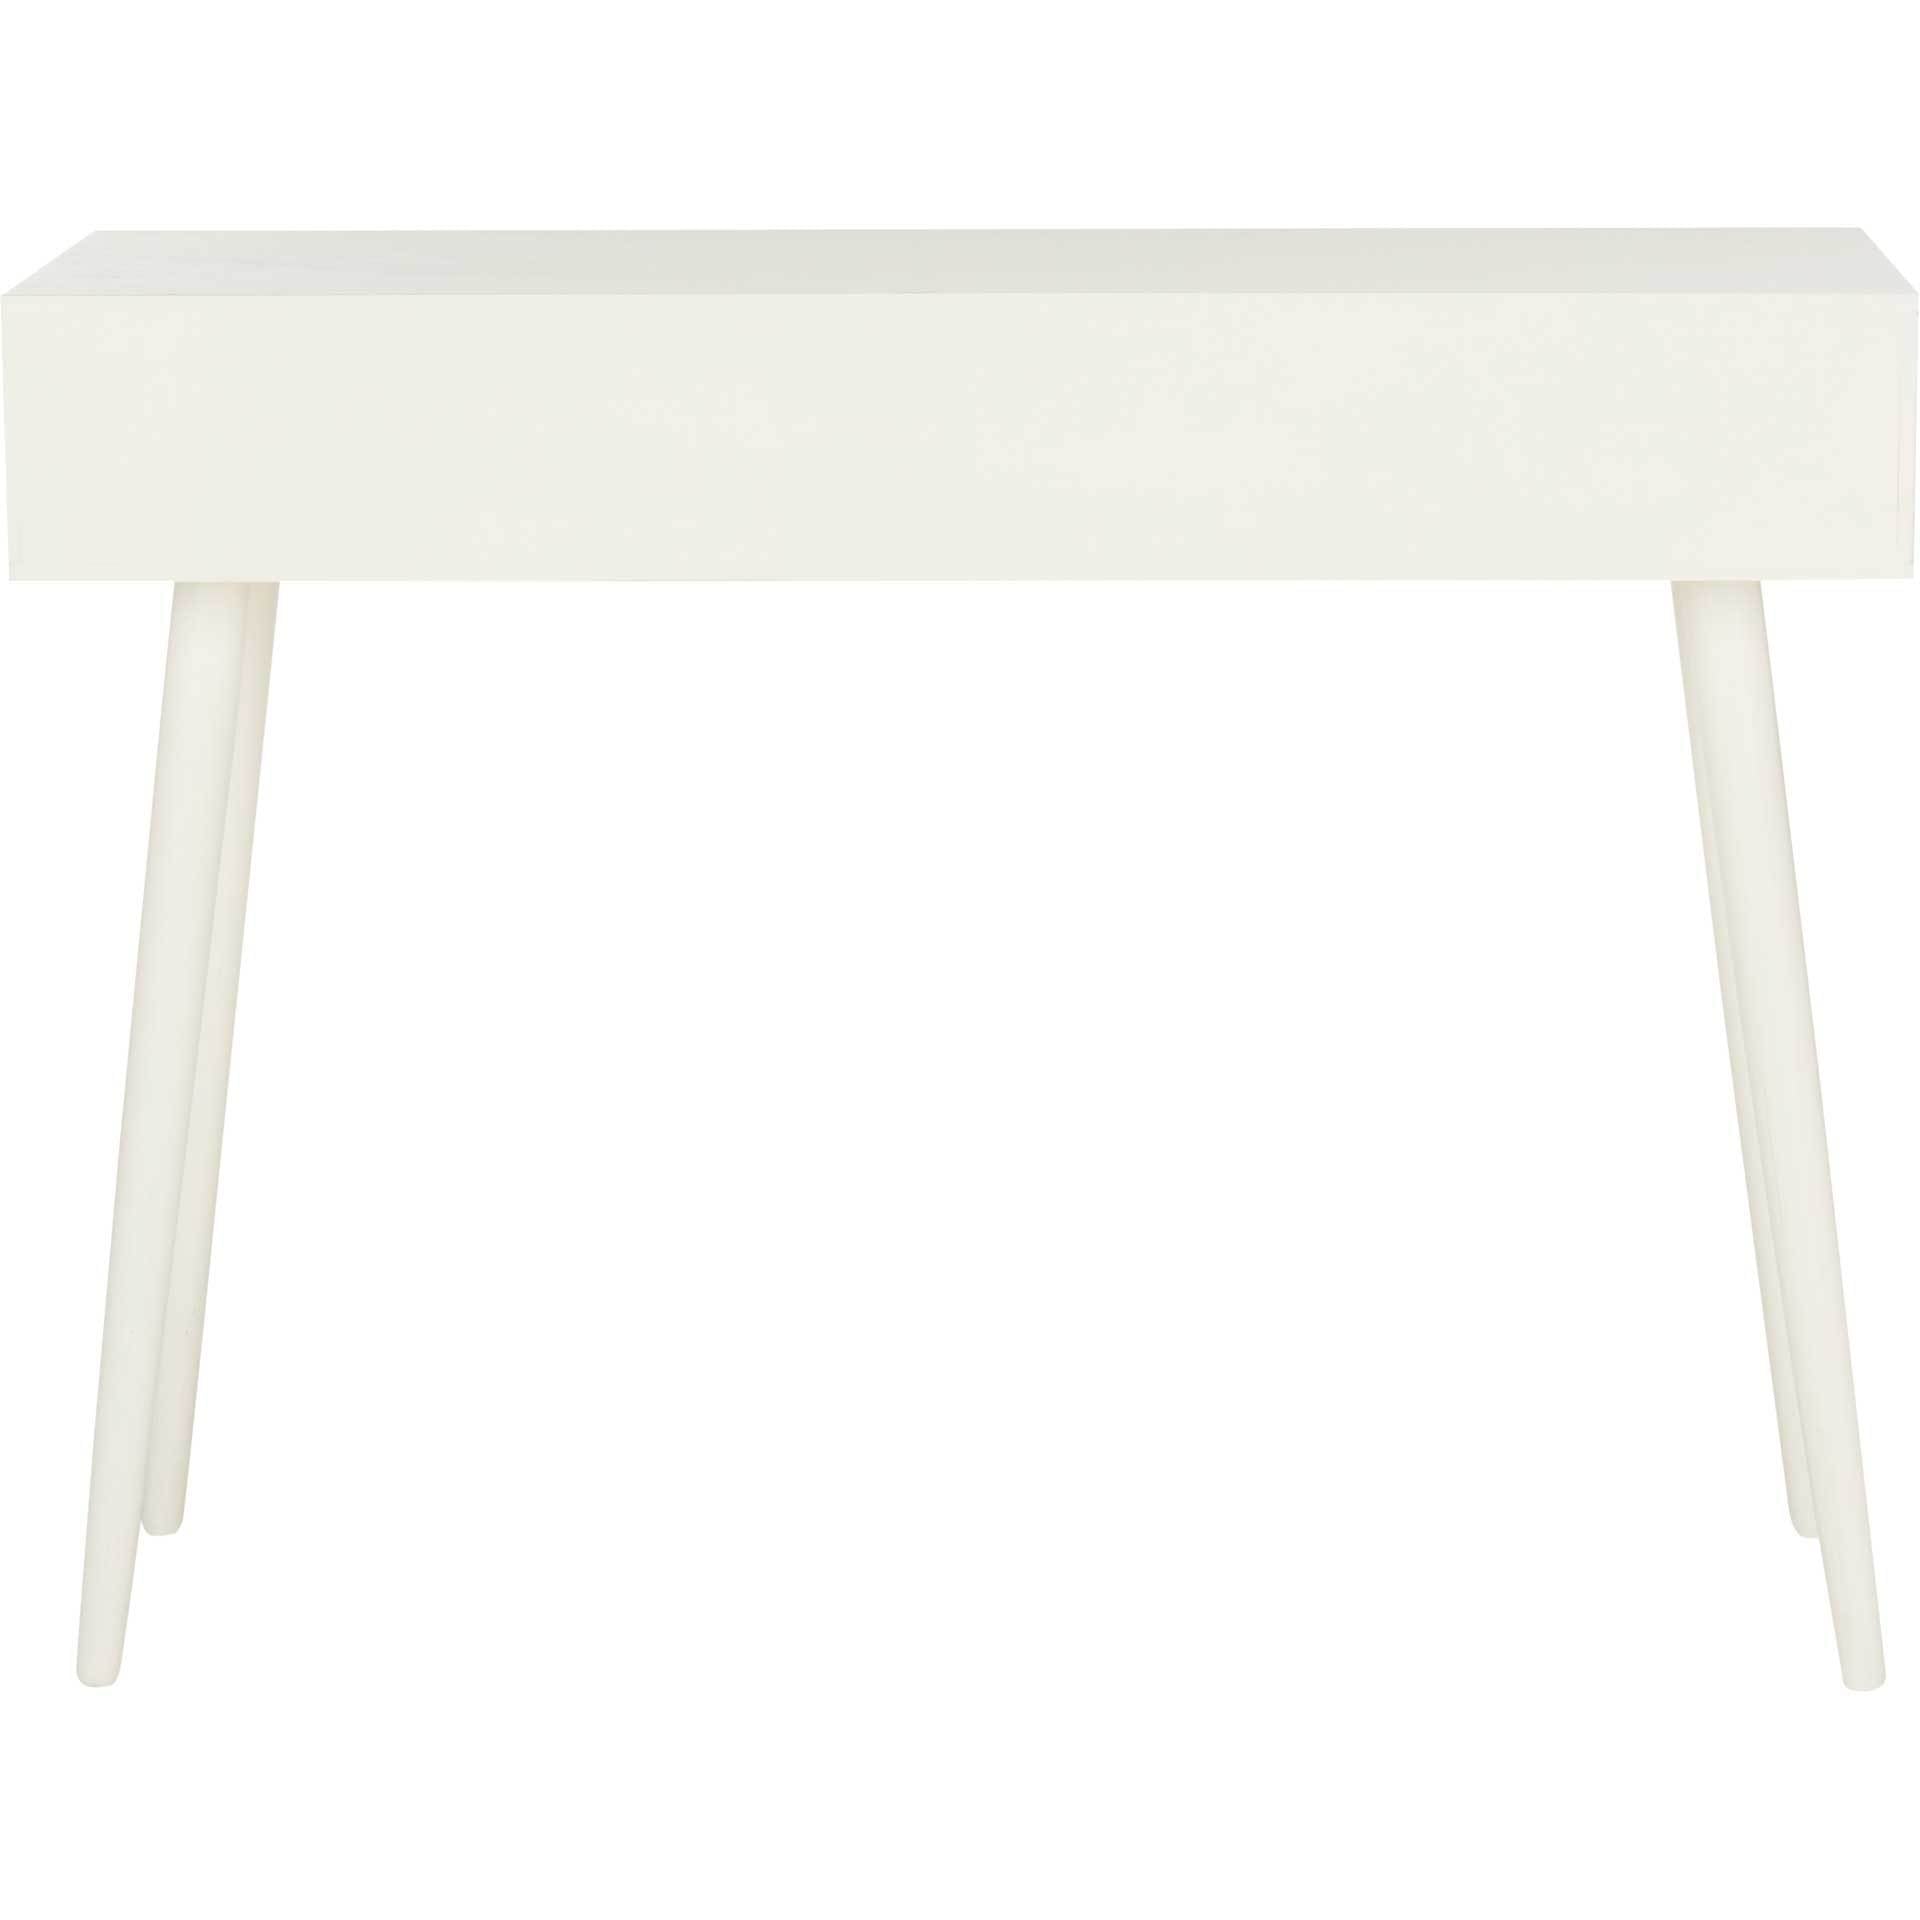 Alara 3 Drawer Console Table Distressed White